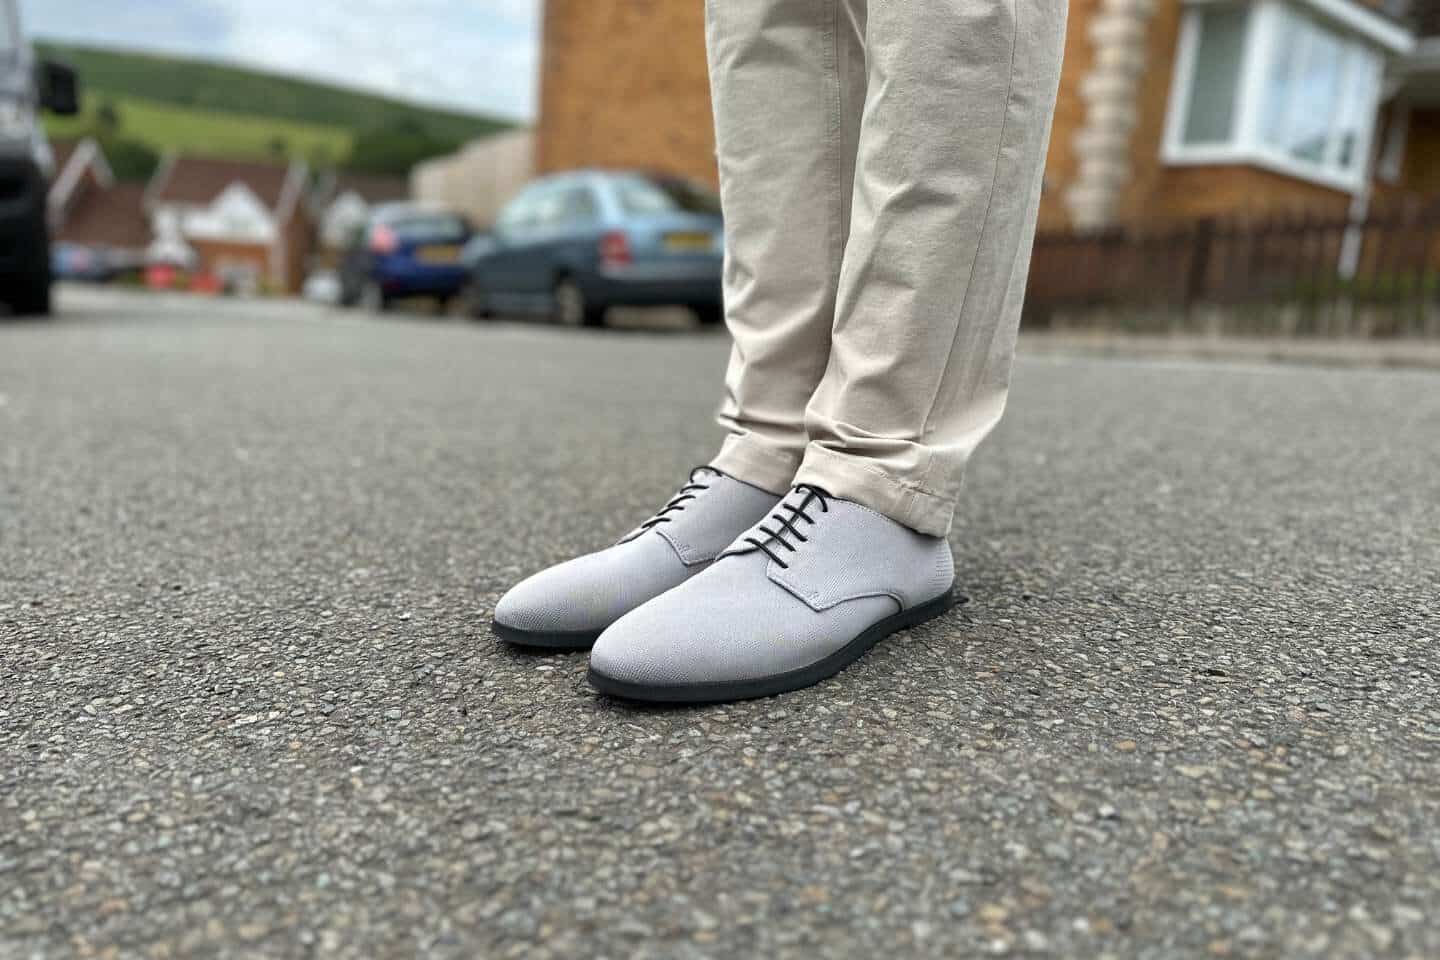 oaka derby shoes review